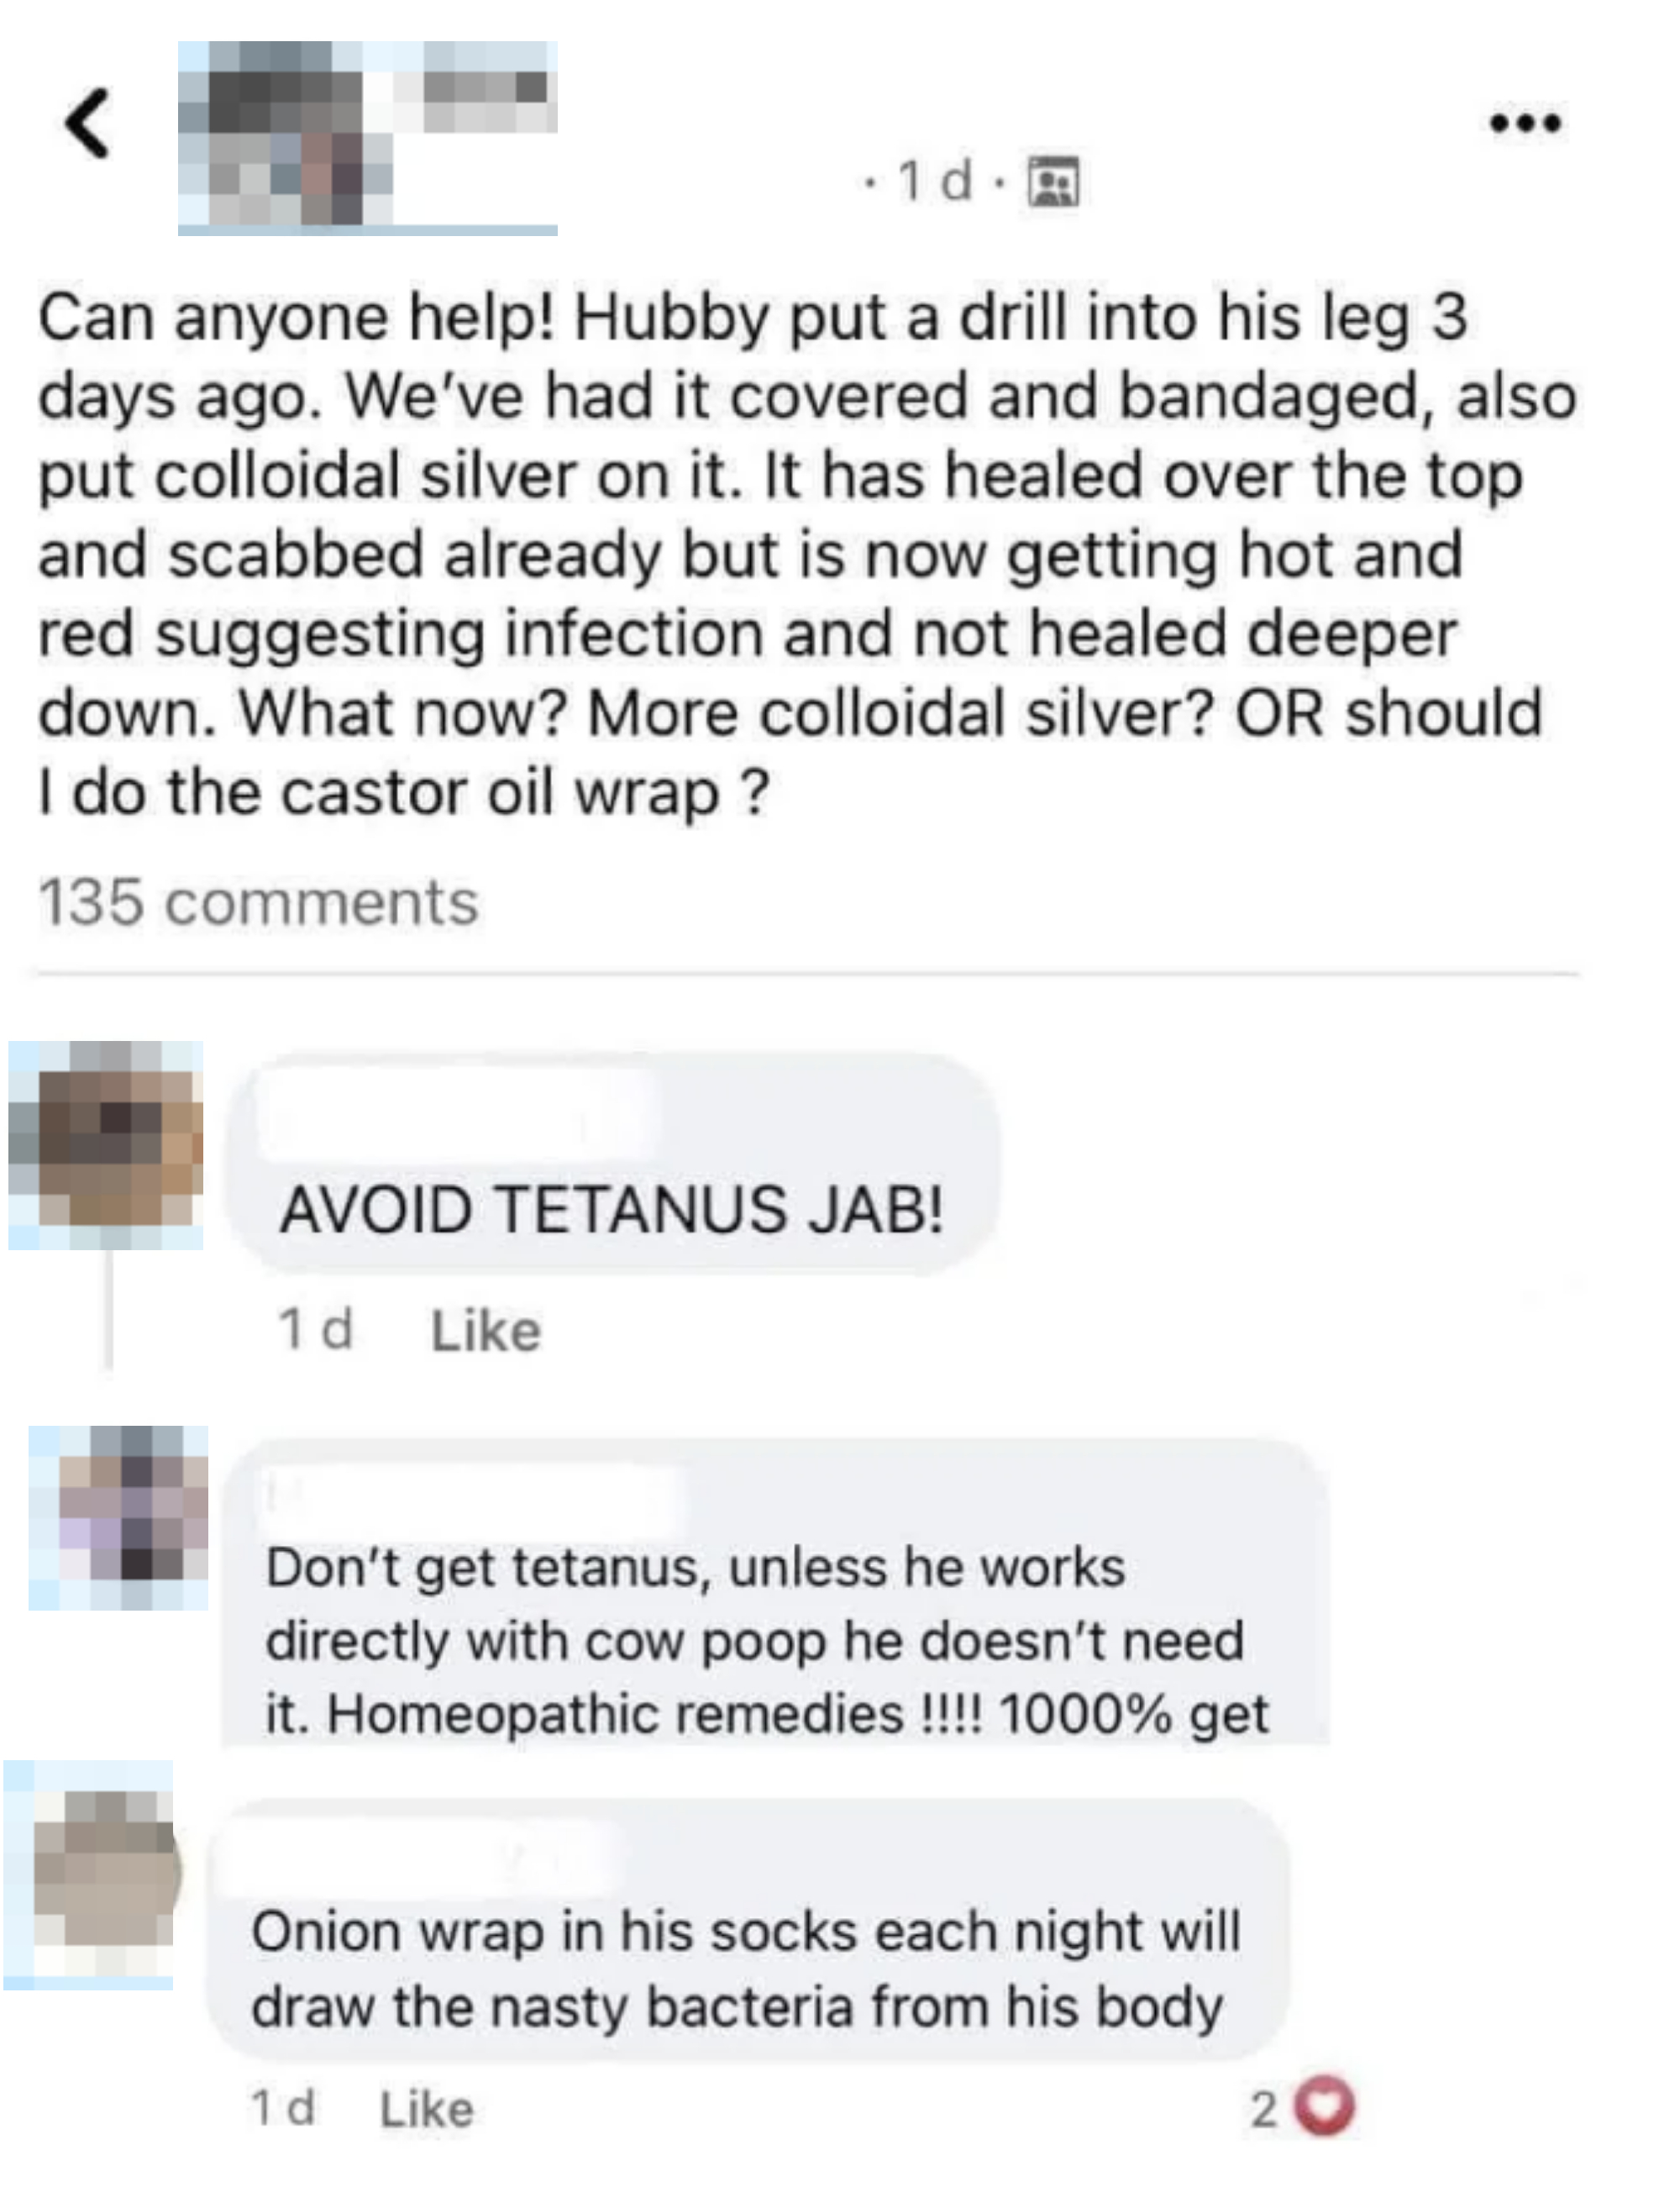 The image shows a social media post where a user seeks advice on treating a leg wound, followed by various comments suggesting remedies